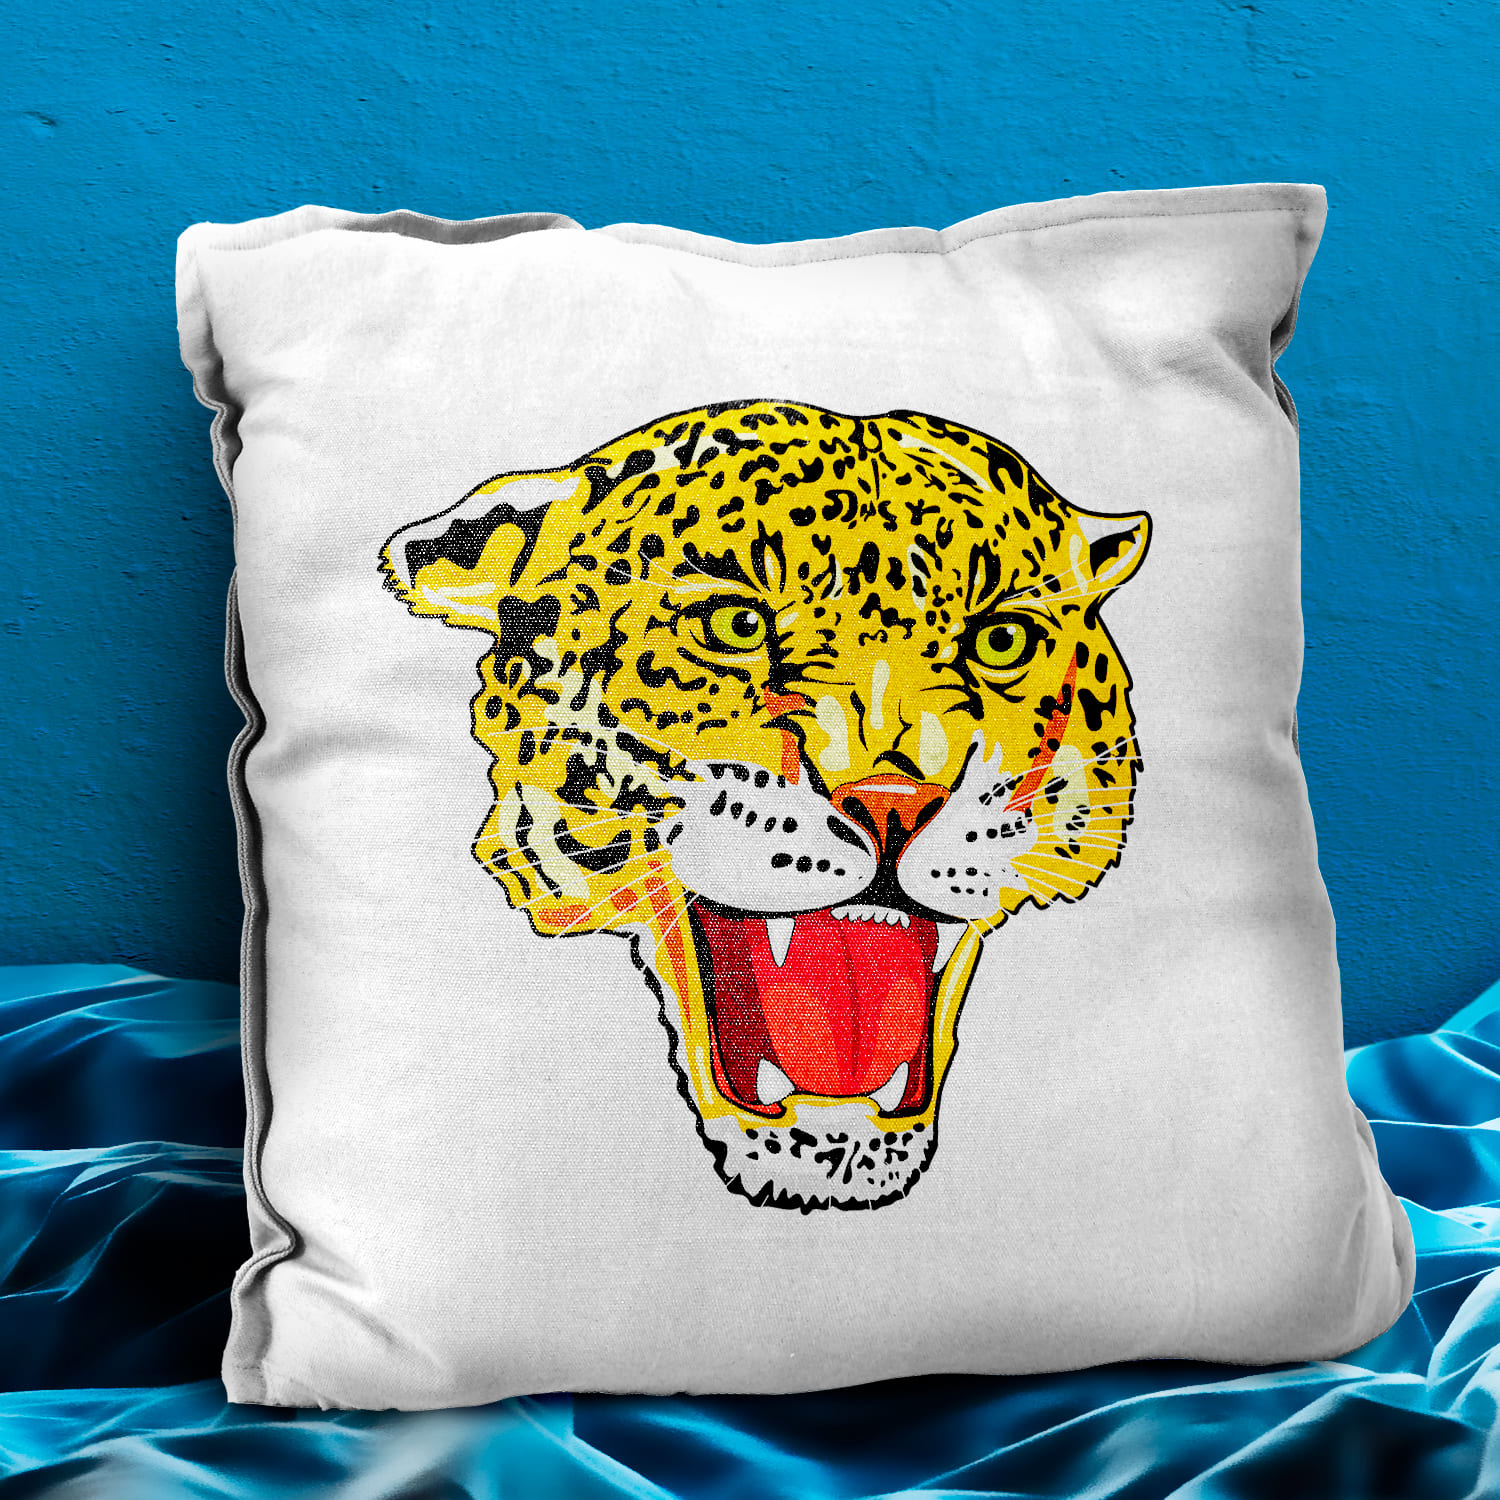 Pillow with a picture of a leopard on it.